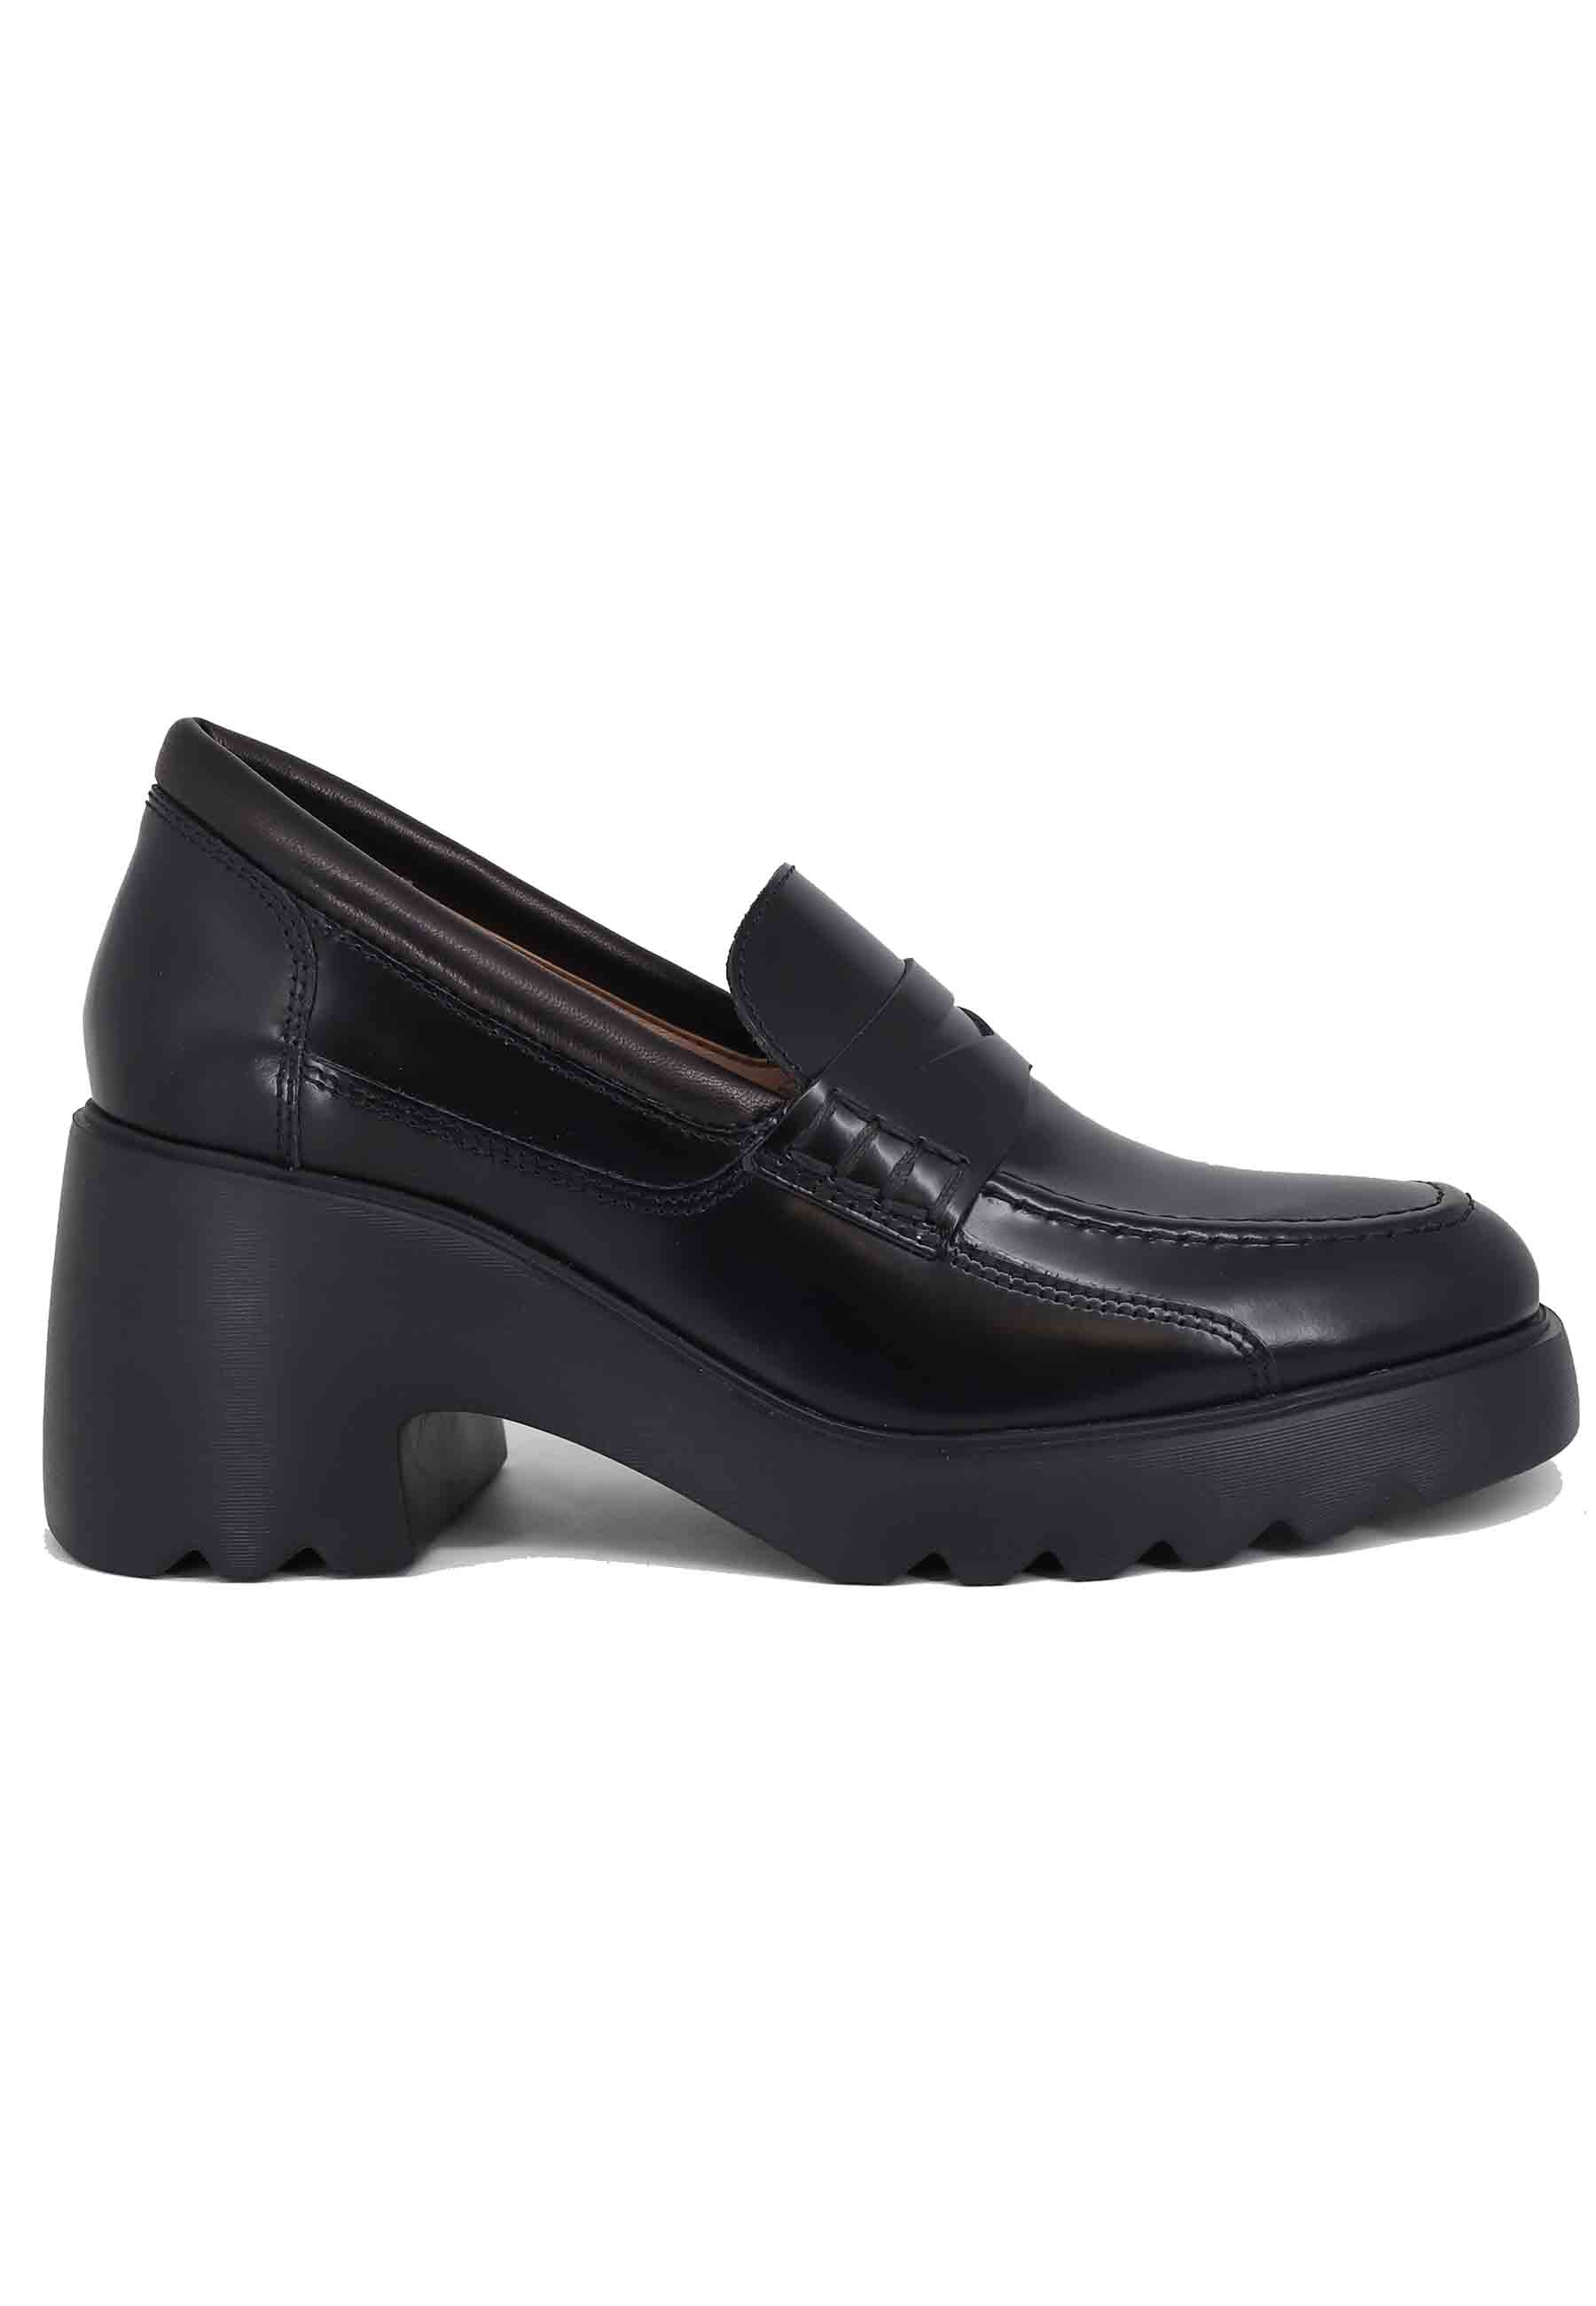 Women's black leather moccasins with high rubber sole